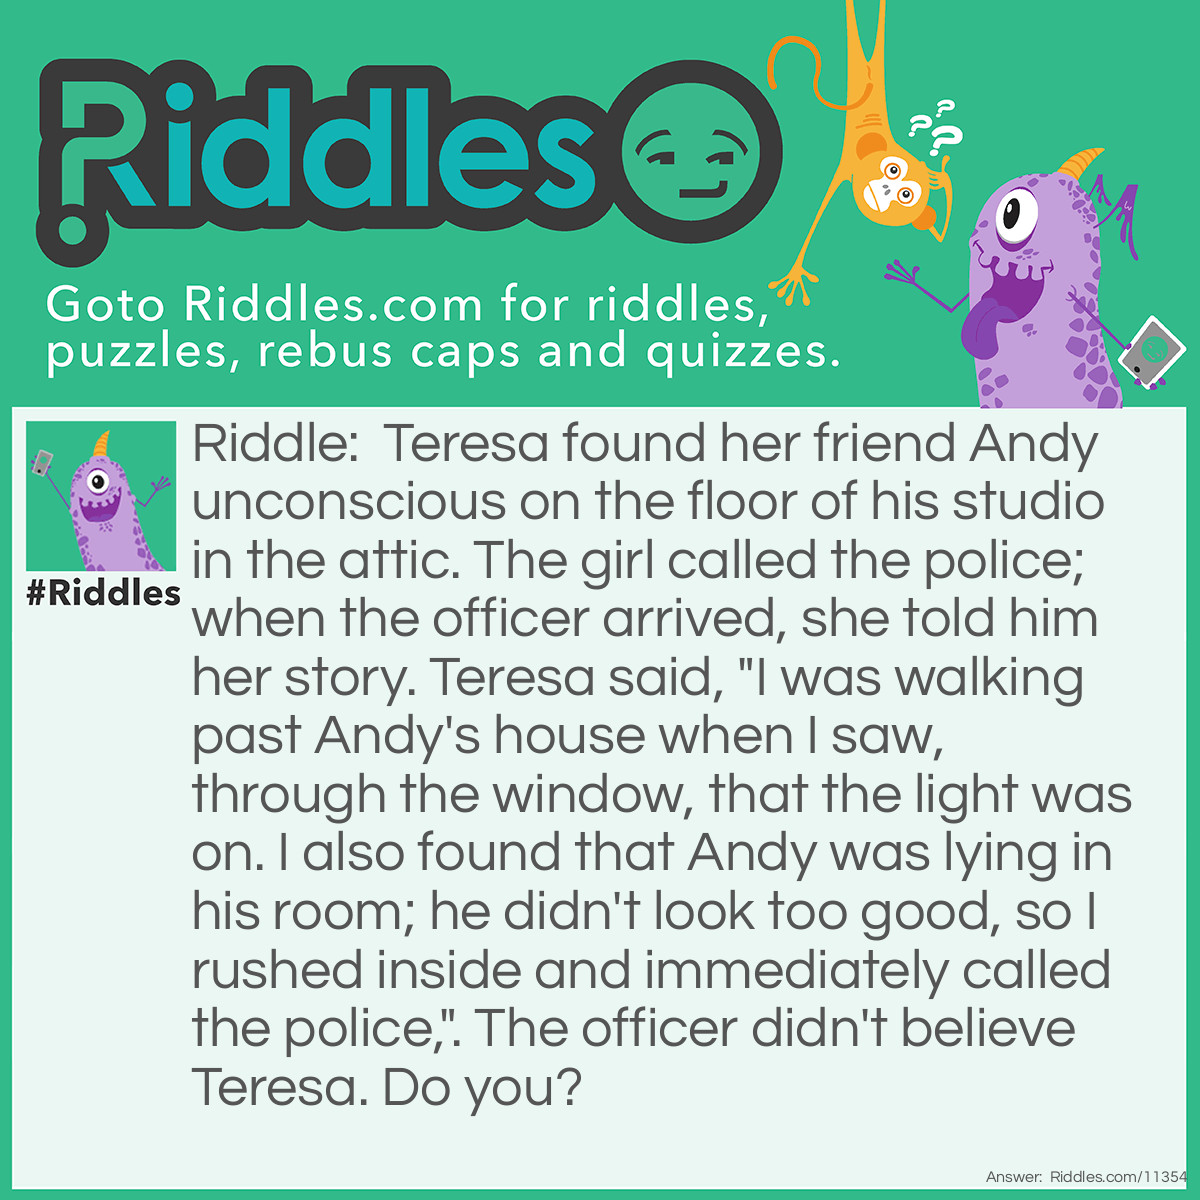 Riddle: Teresa found her friend Andy unconscious on the floor of his studio in the attic. The girl called the police; when the officer arrived, she told him her story. Teresa said, "I was walking past Andy's house when I saw, through the window, that the light was on. I also found that Andy was lying in his room; he didn't look too good, so I rushed inside and immediately called the police,". The officer didn't believe Teresa. Do you? Answer: No; Teresa's story doesn't sound quite right. Andy was found in the attic; it's on the TOP floor of a house. Teresa couldn't possibly see the guy through the window.